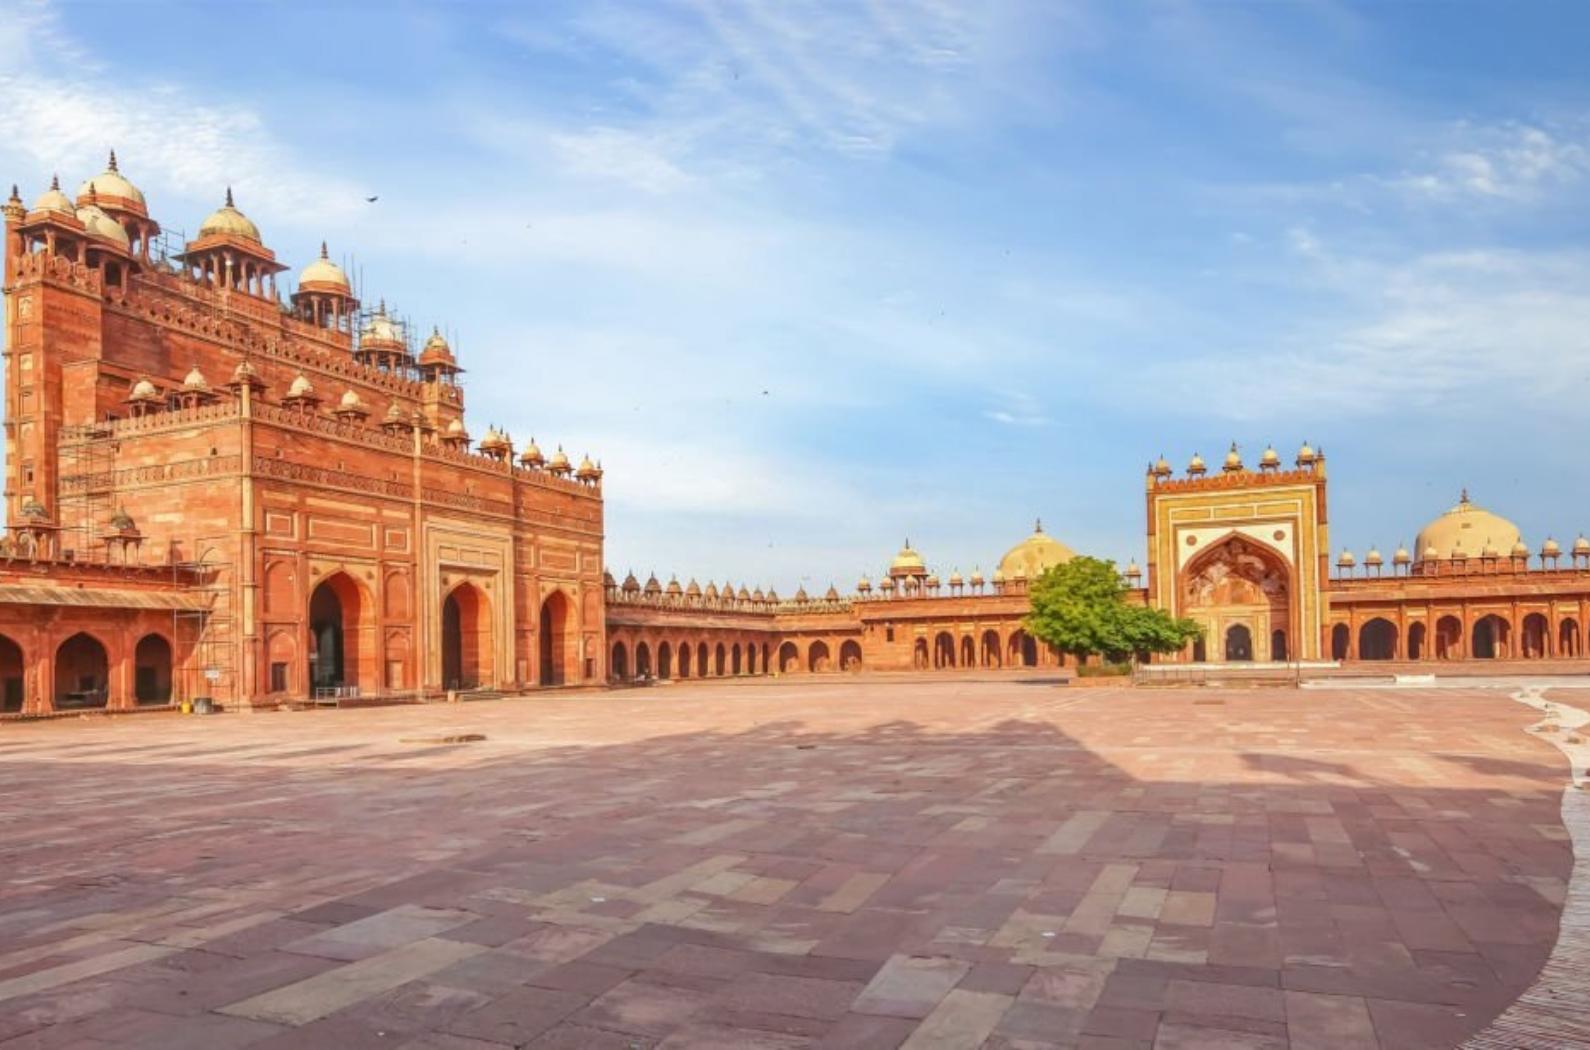 Fatehpur Sikri Agra courtyard with view of giant red sandstone gateway known as Buland Darwaza built by Mughal Emperor Akbar.